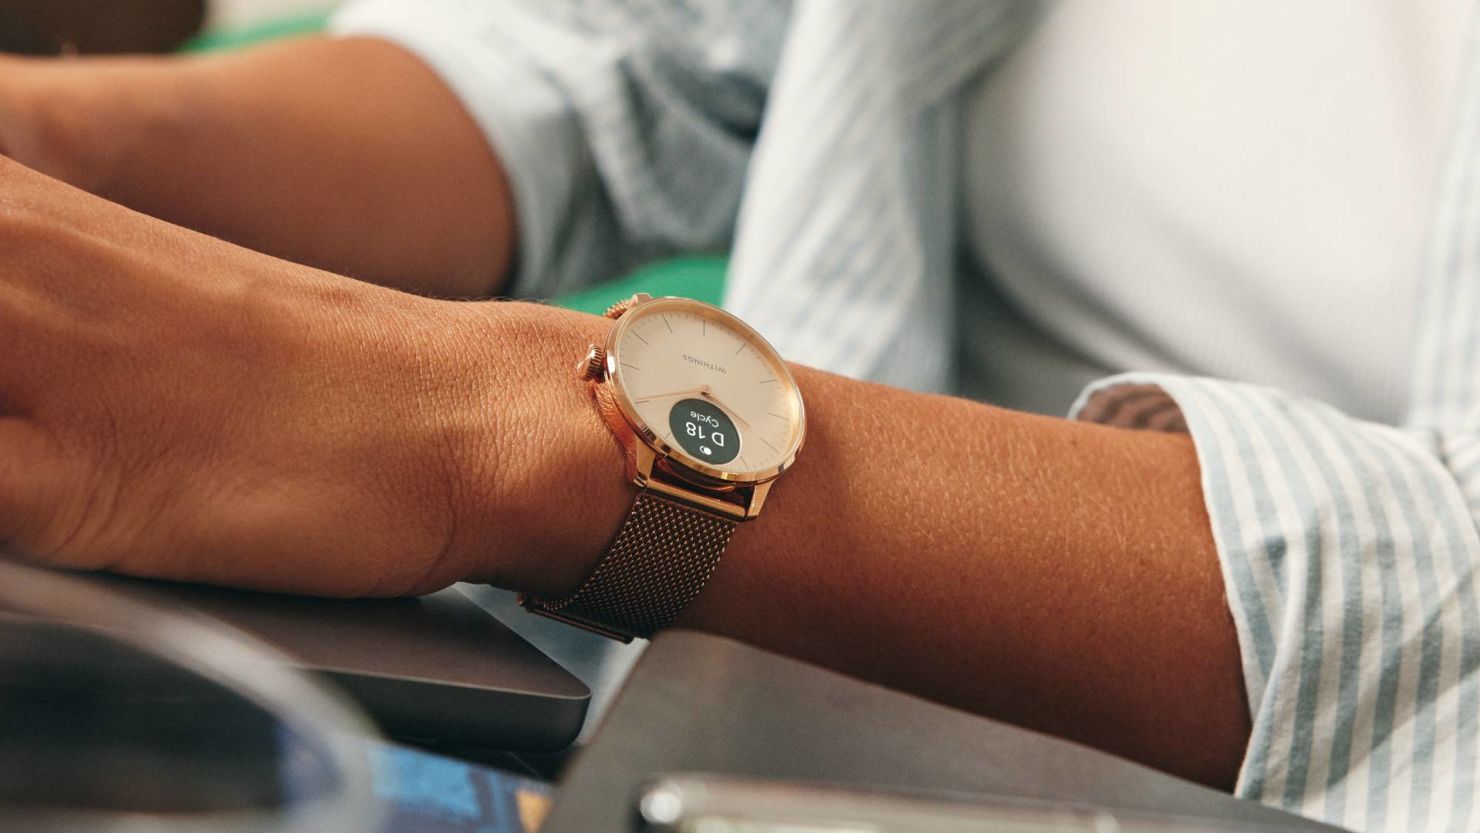 Withings does the hybrid smartwatch right with the Steel HR